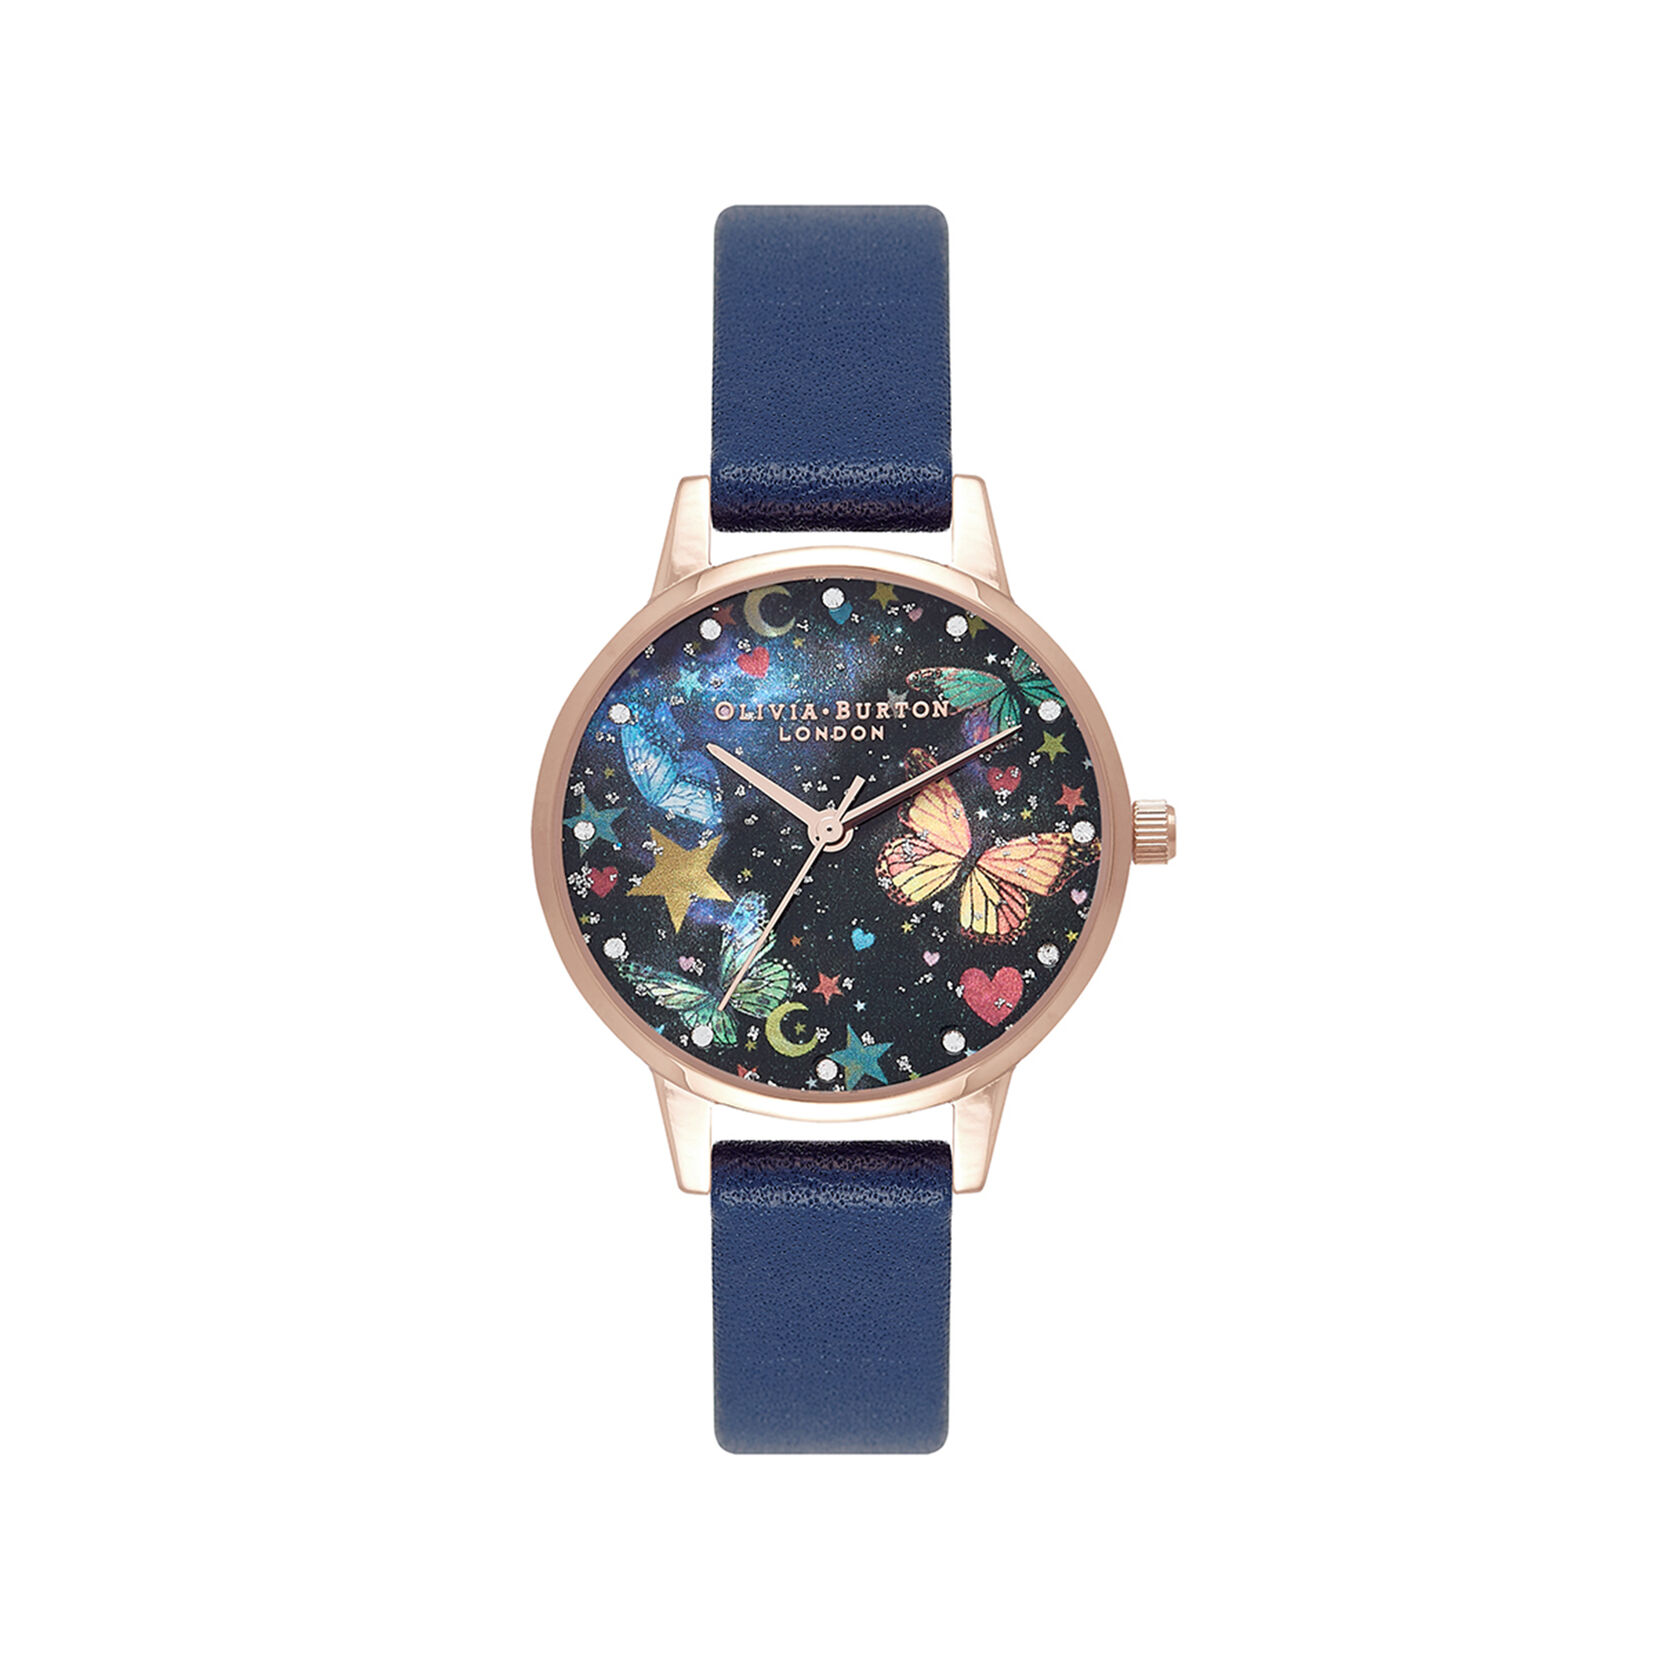 30mm Rose Gold & Blue Leather Strap Watch